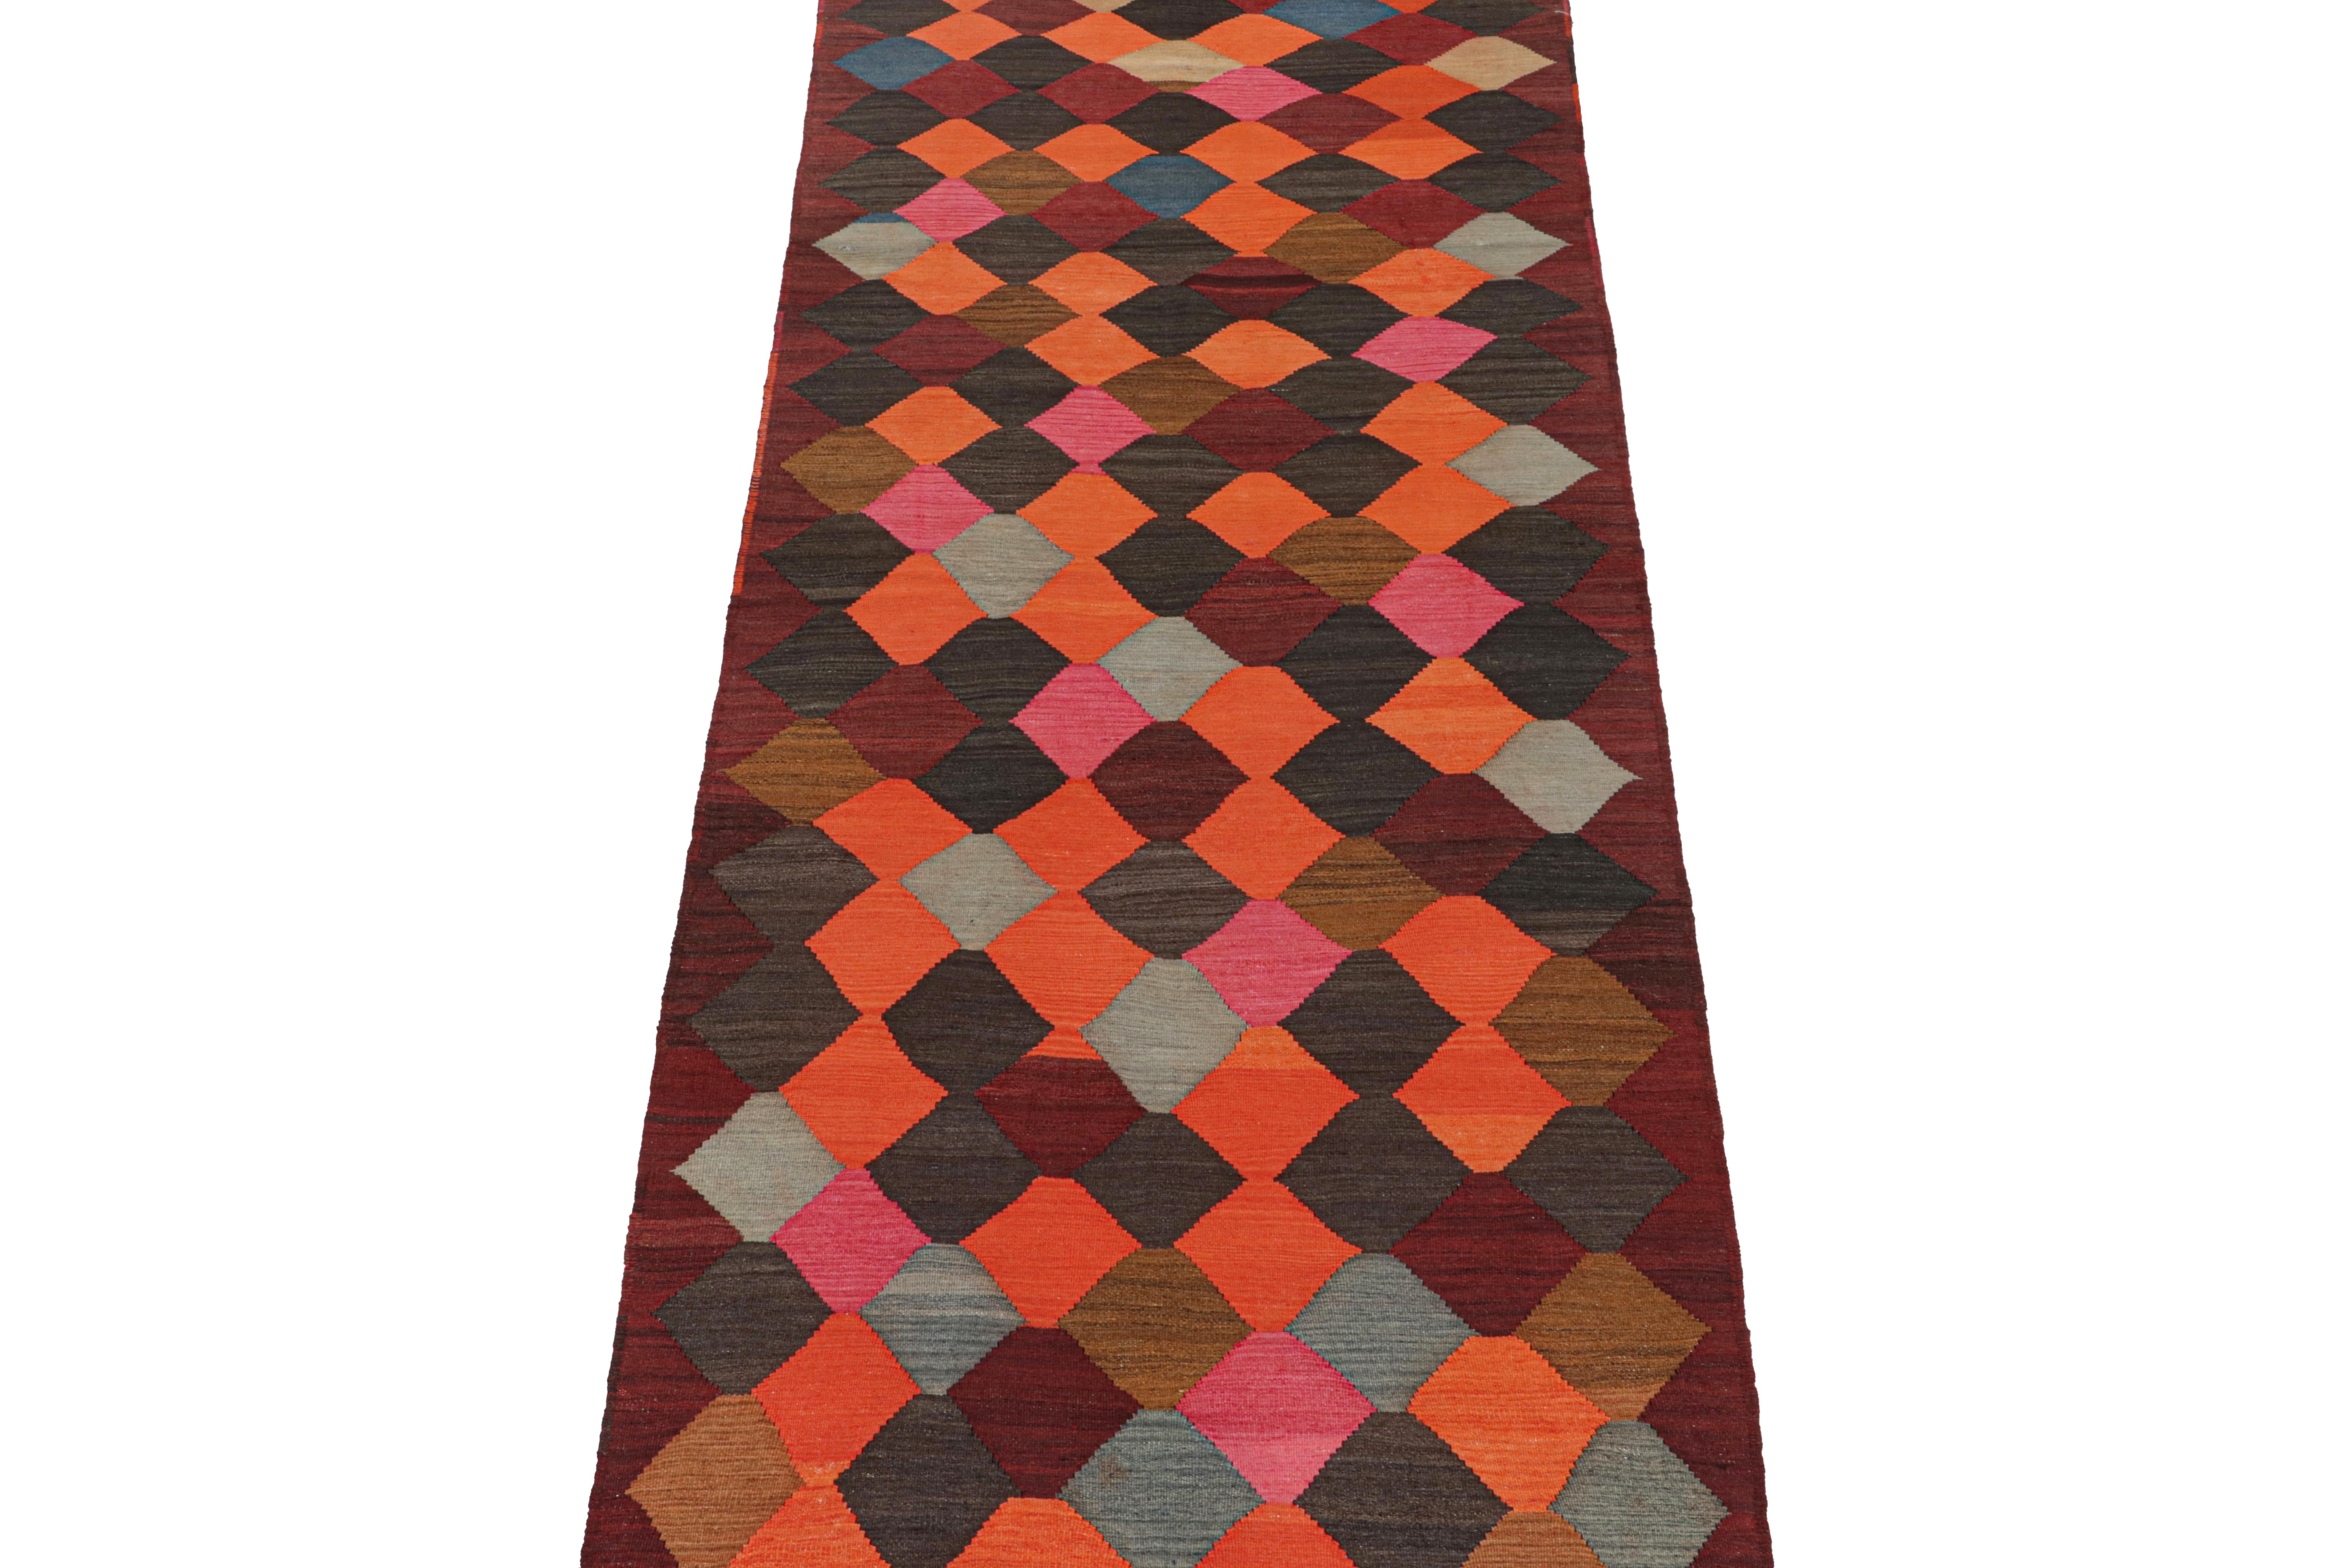 This vintage 4x11 Persian Kilim is a tribal Karadagh rug — named after the mountainous region known for its fabulous works. Handwoven in wool, it originates circa 1950-1960.

Further on the Design:

The bold design prefers diamond patterns in